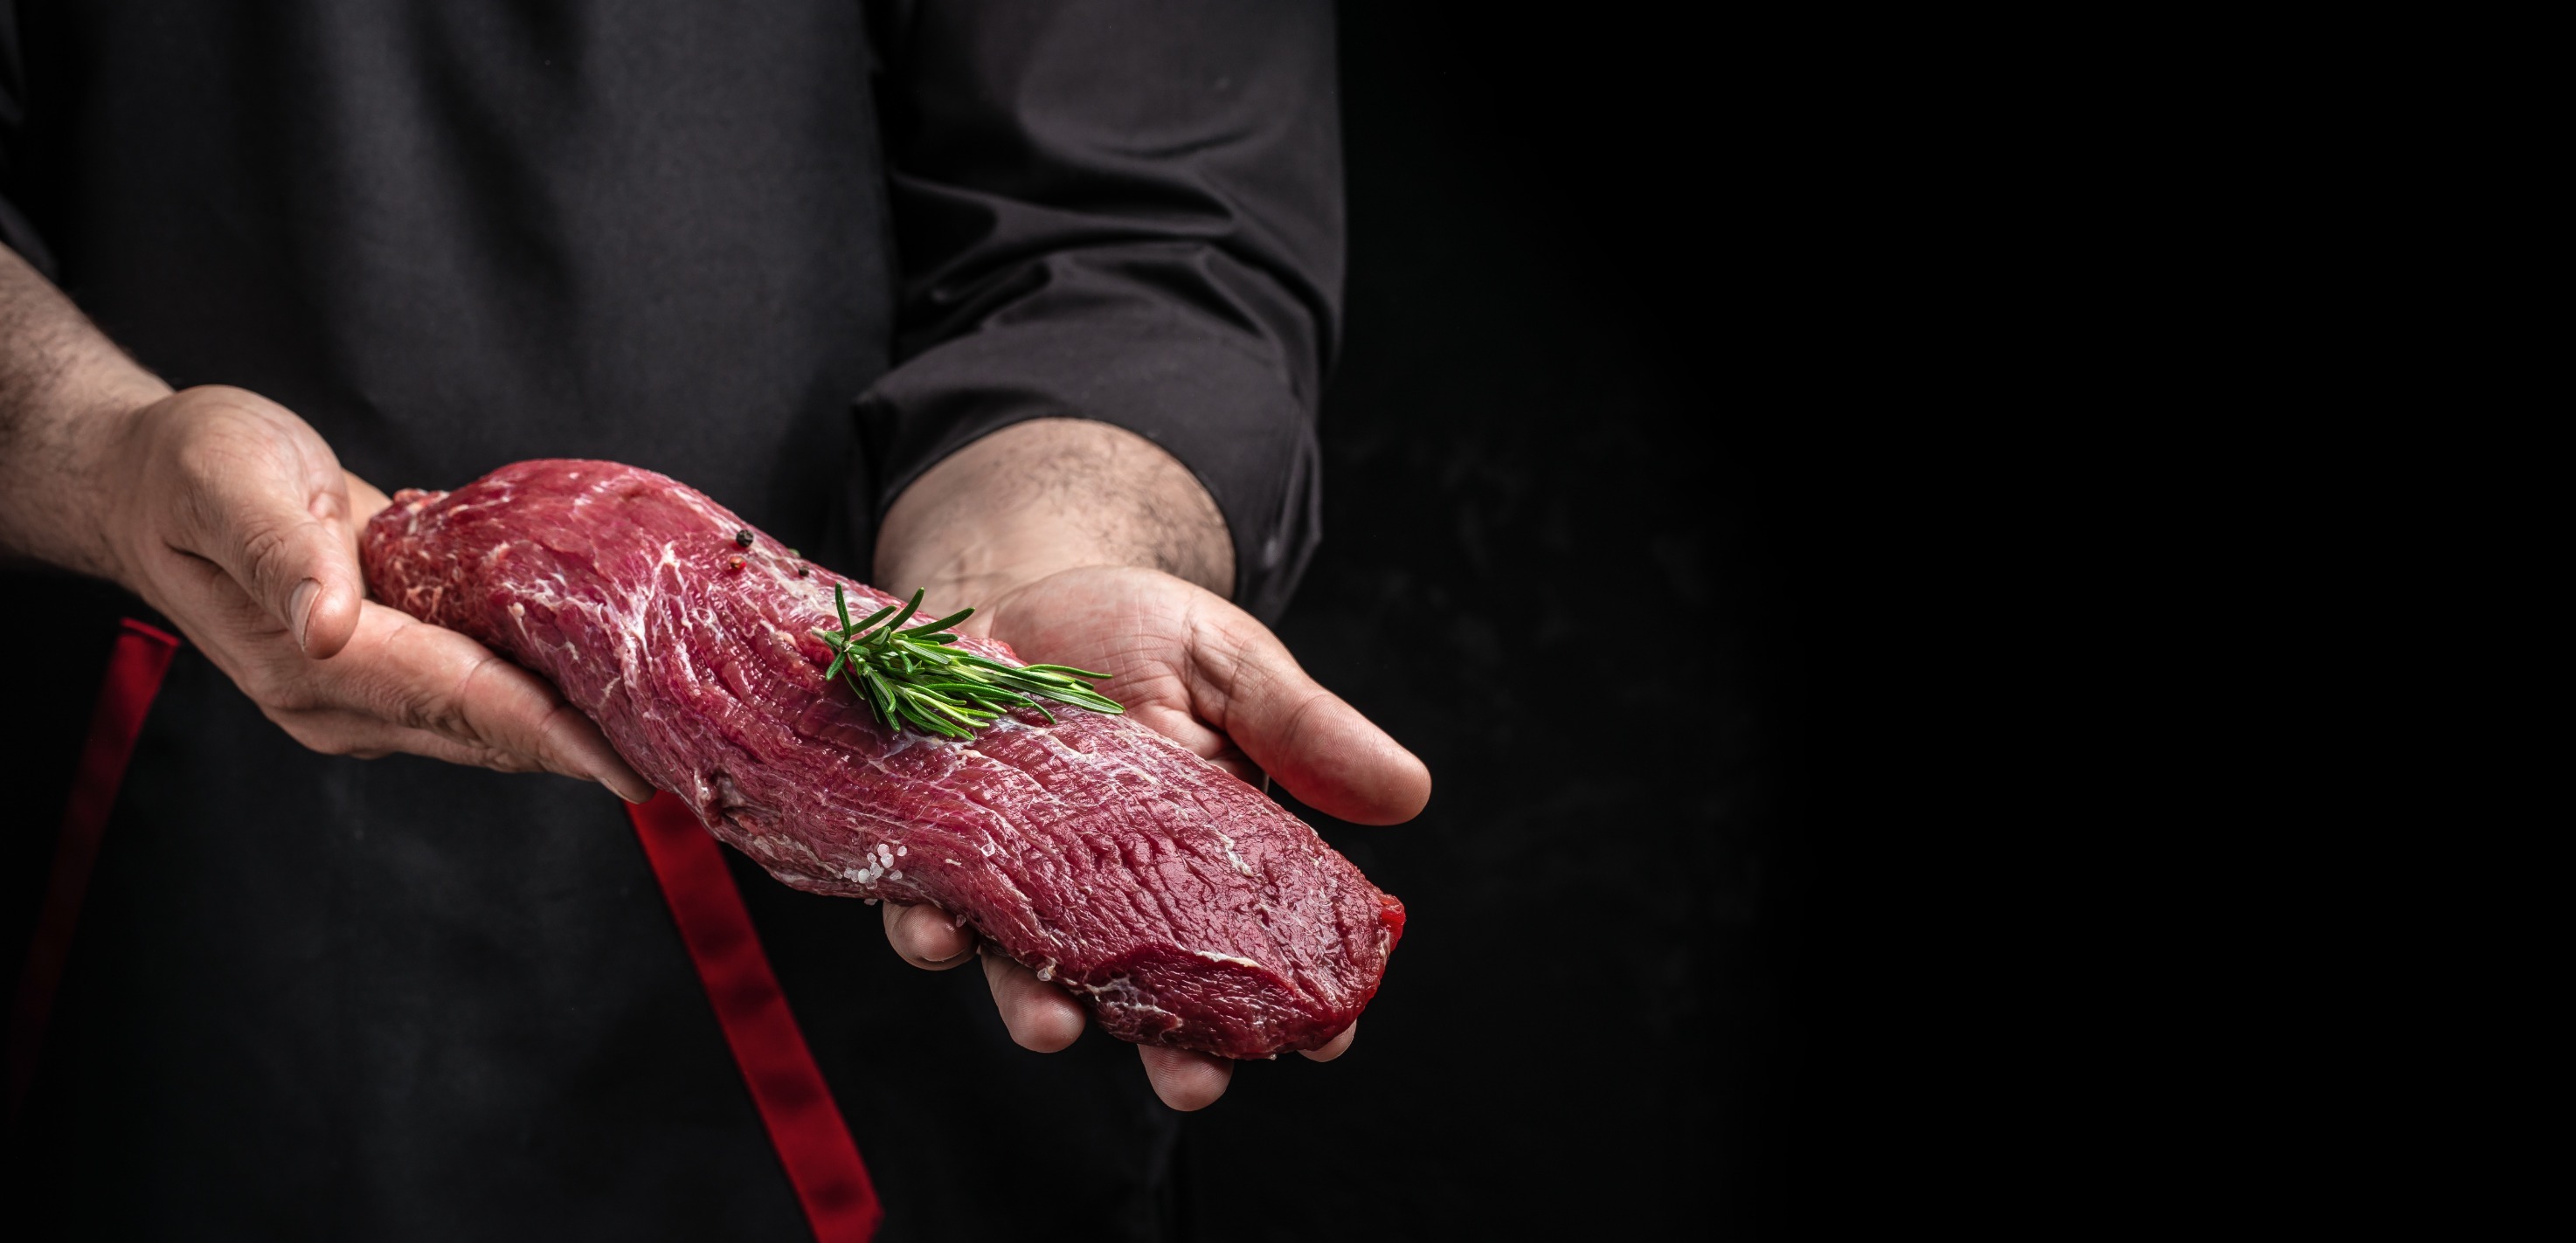 male hands holding beef meat on a dark background, Whole piece of tenderloin with steaks and spices ready to cook, butchery skills, Long banner format,